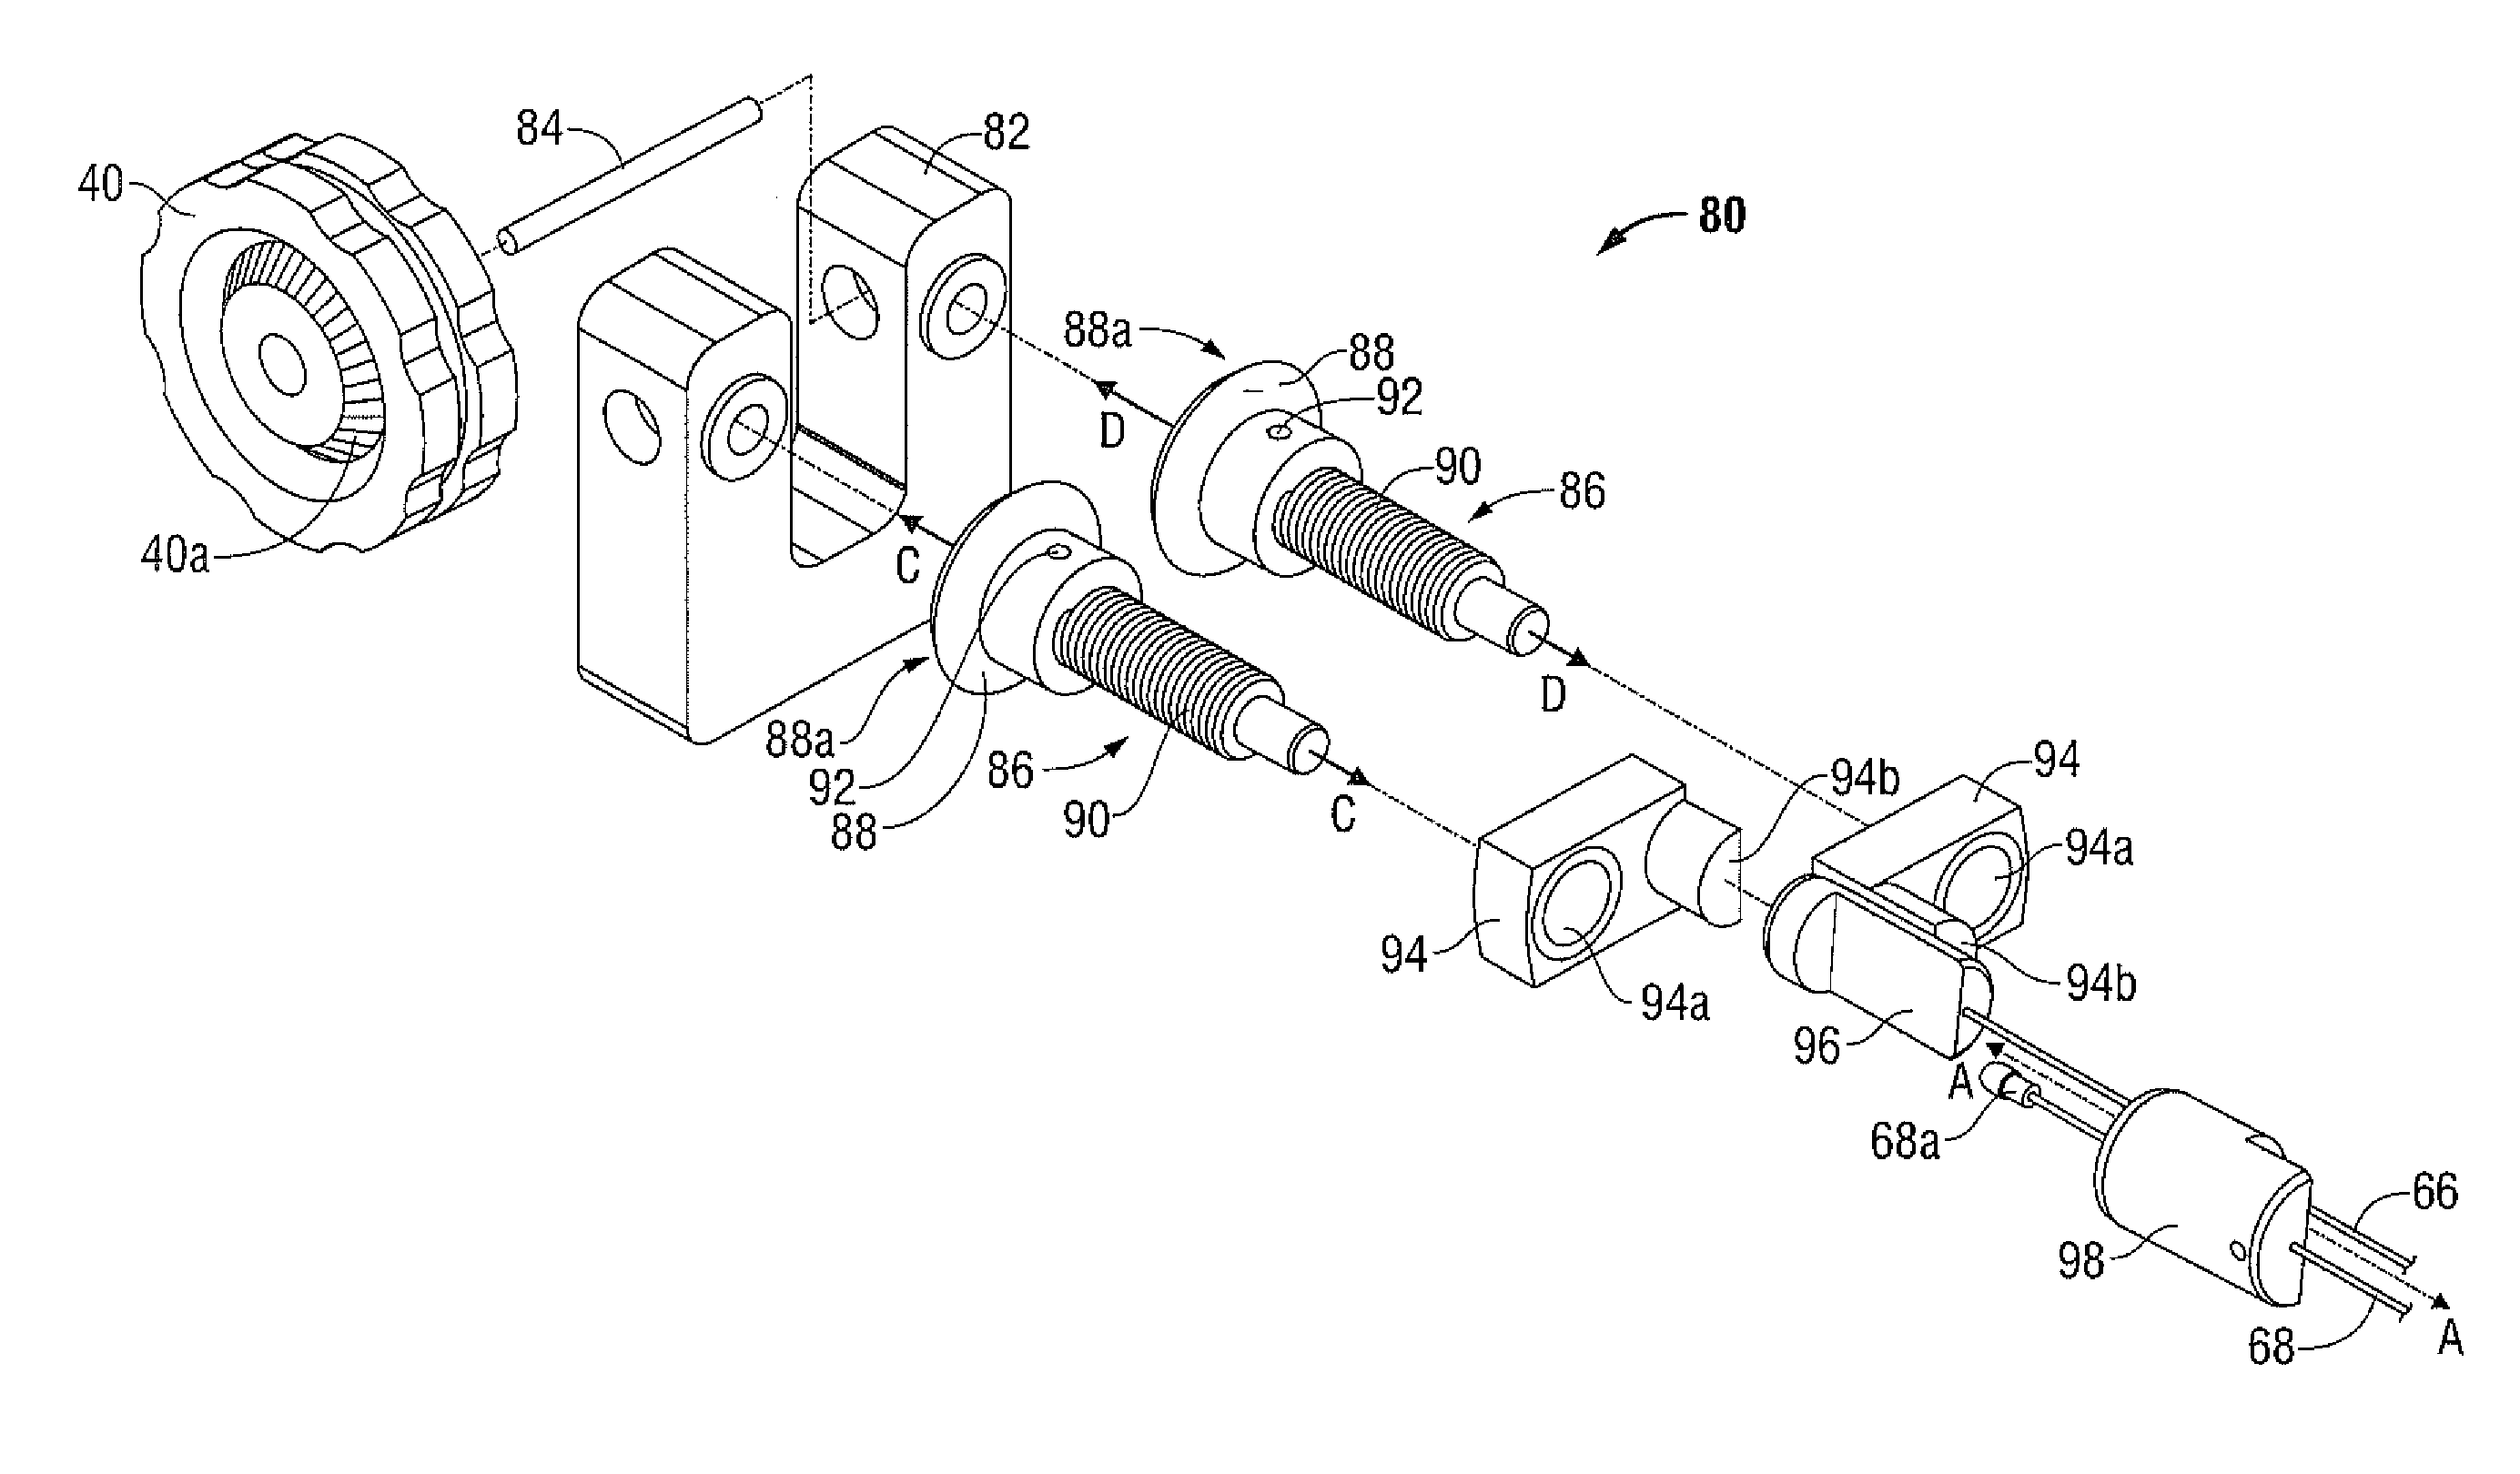 Drive mechanism for articulation of a surgical instrument